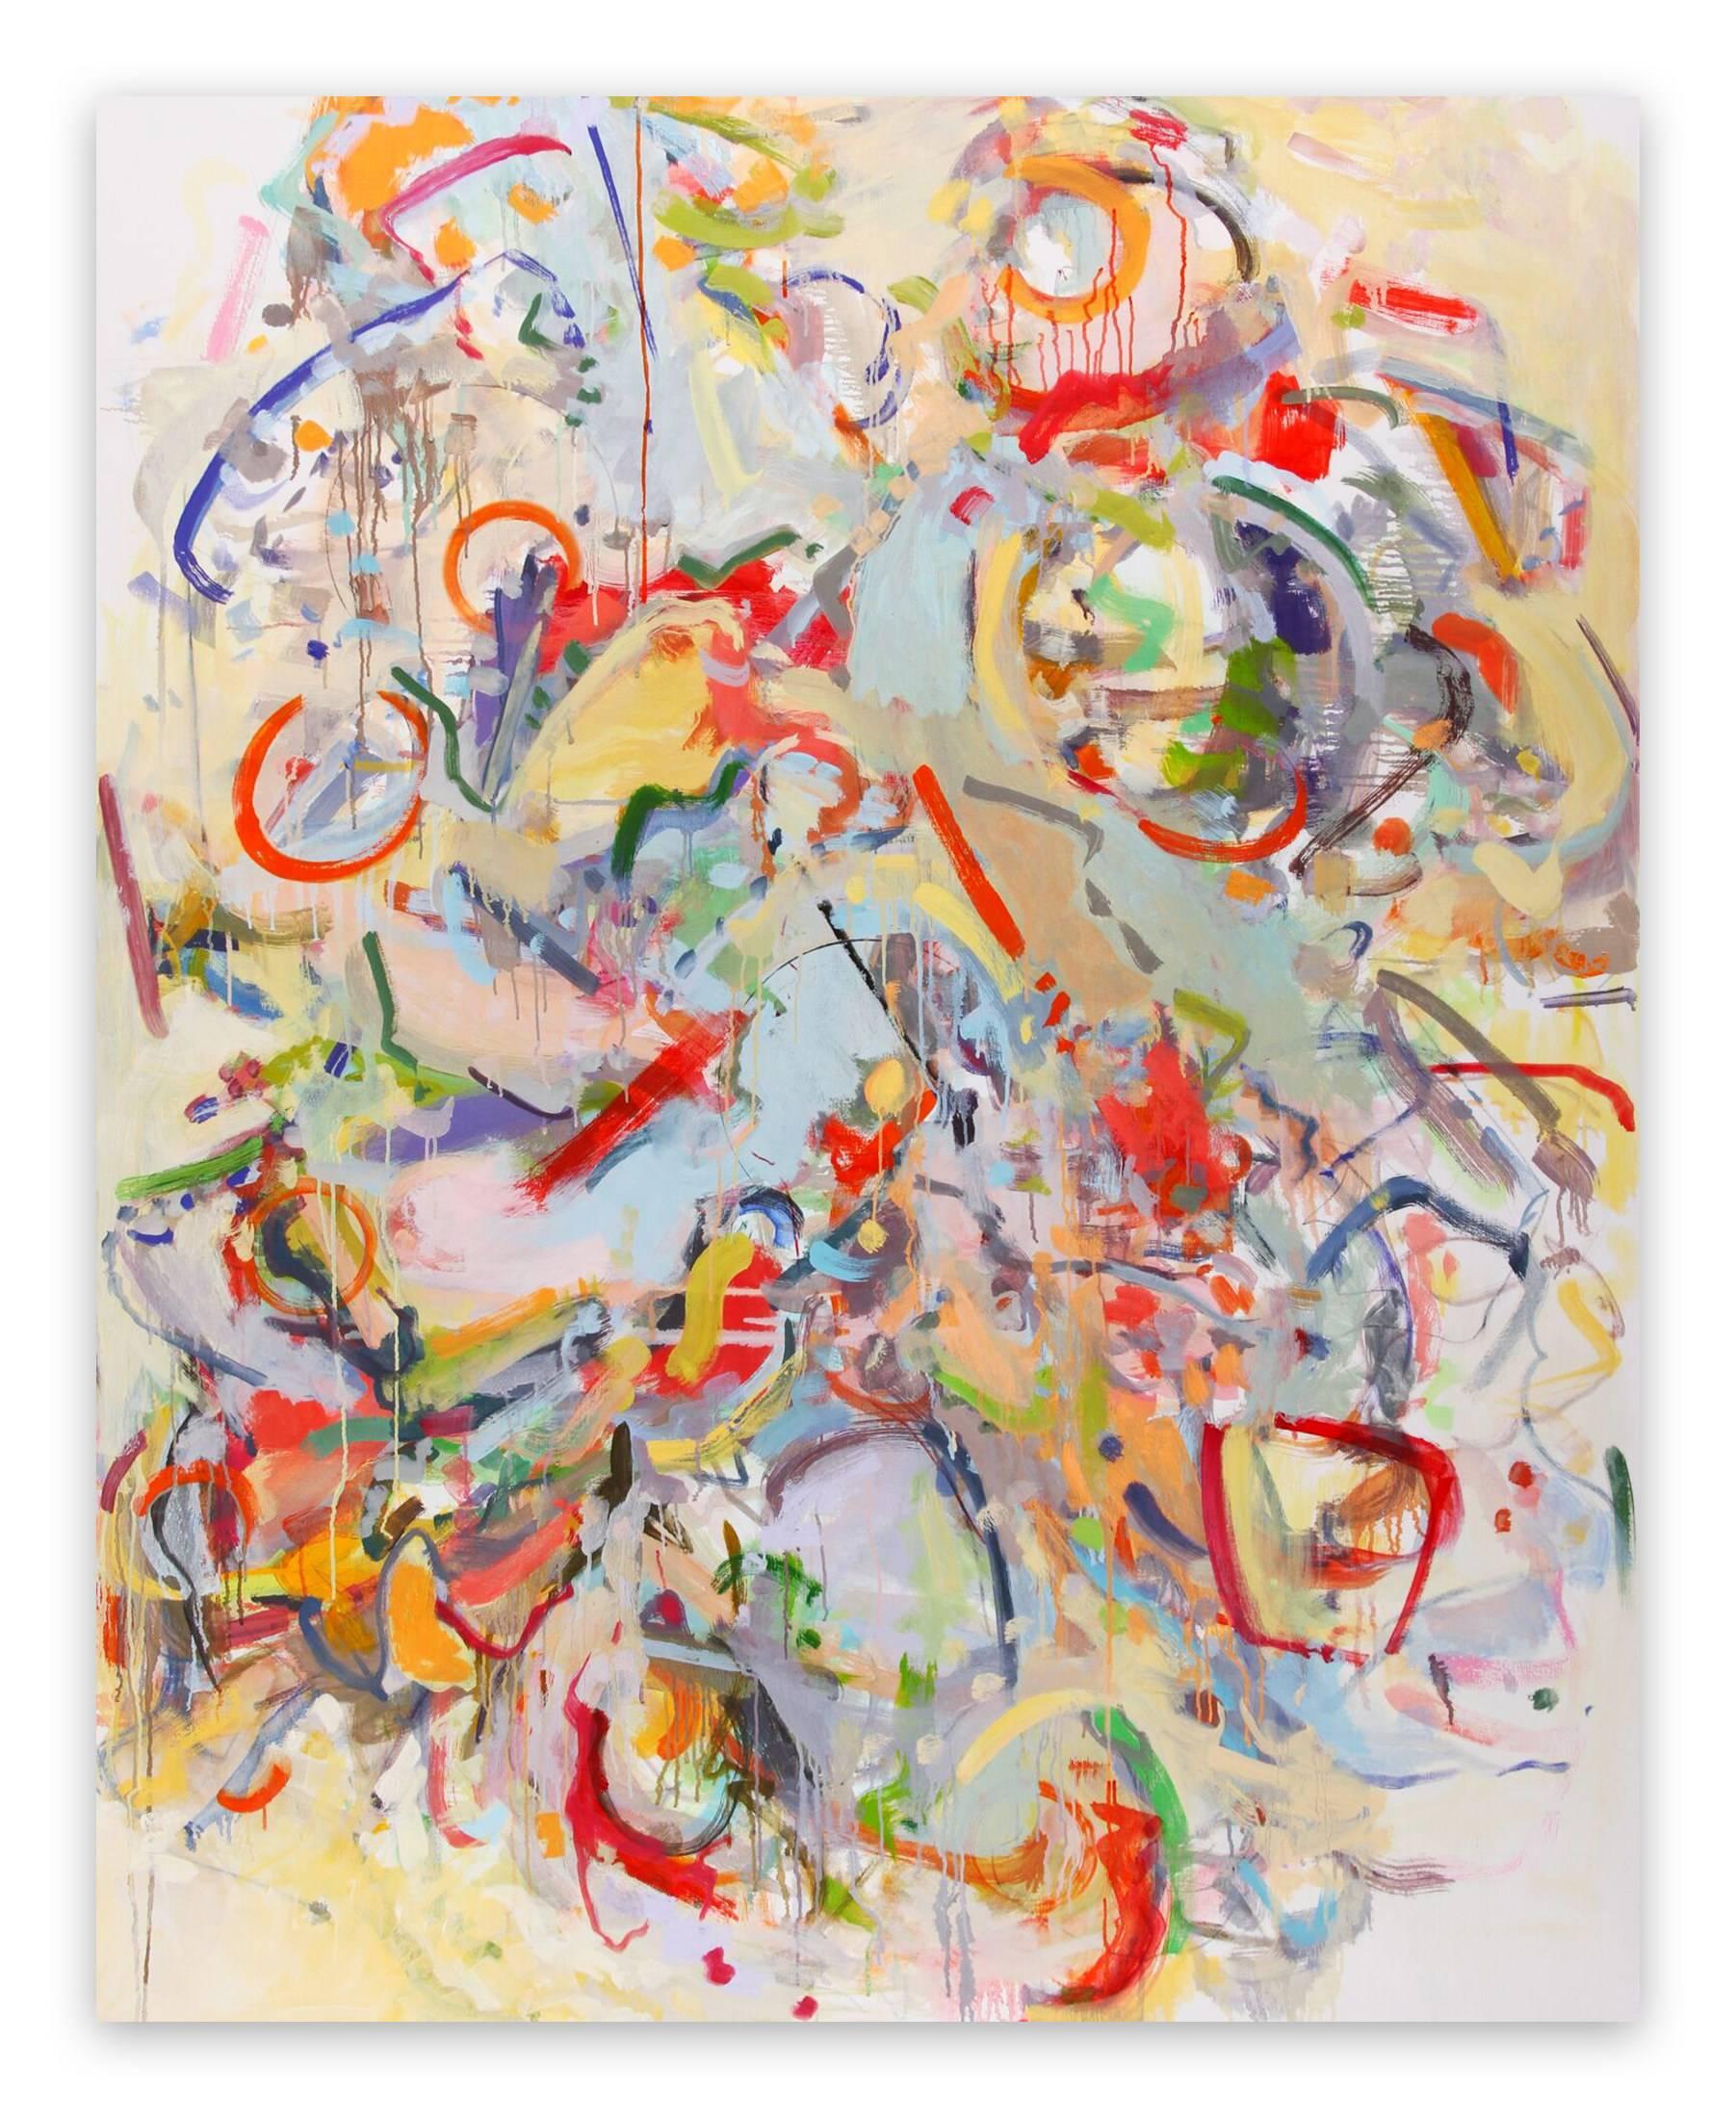 Abstract Painting Gina Werfel - Tumble (peinture d'expressionnisme abstrait)